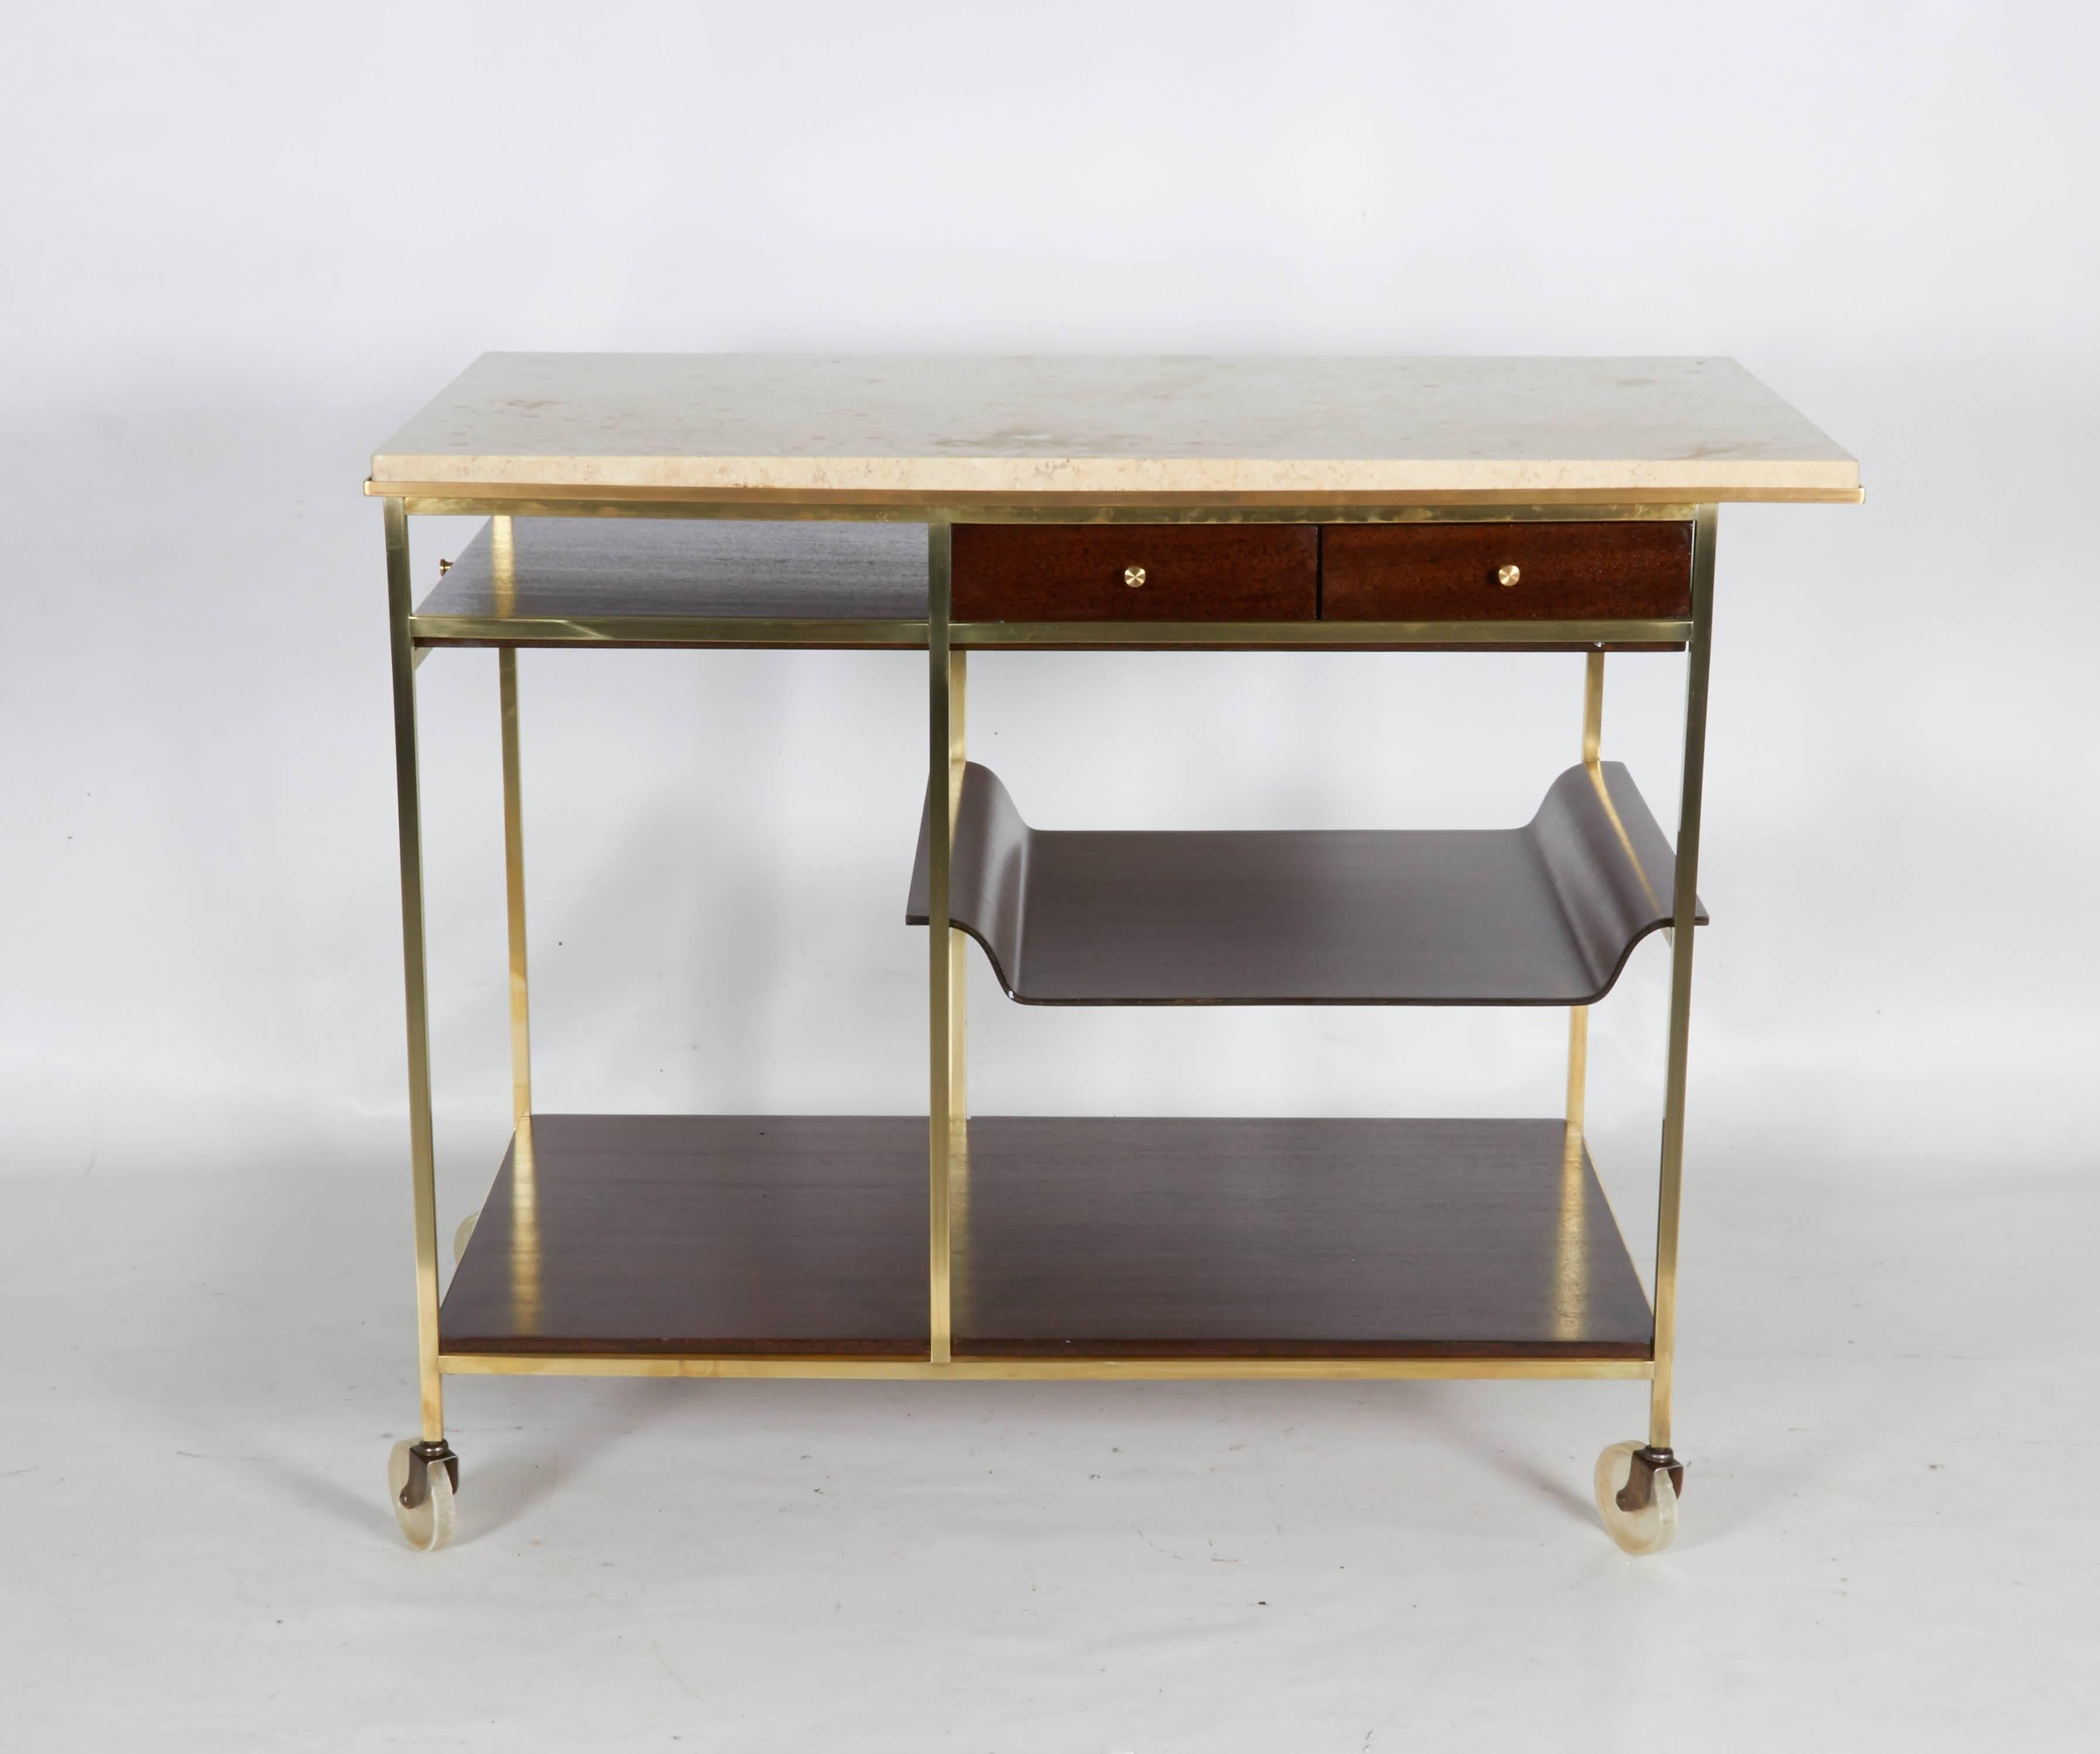 Very handsome and beautifully detailed bar or serving cart. The cart has its original travertine marble top. The structure is polished brass and the wood has been lacquered a rich, dark brown. It has both a pull out surface and a removable tray.